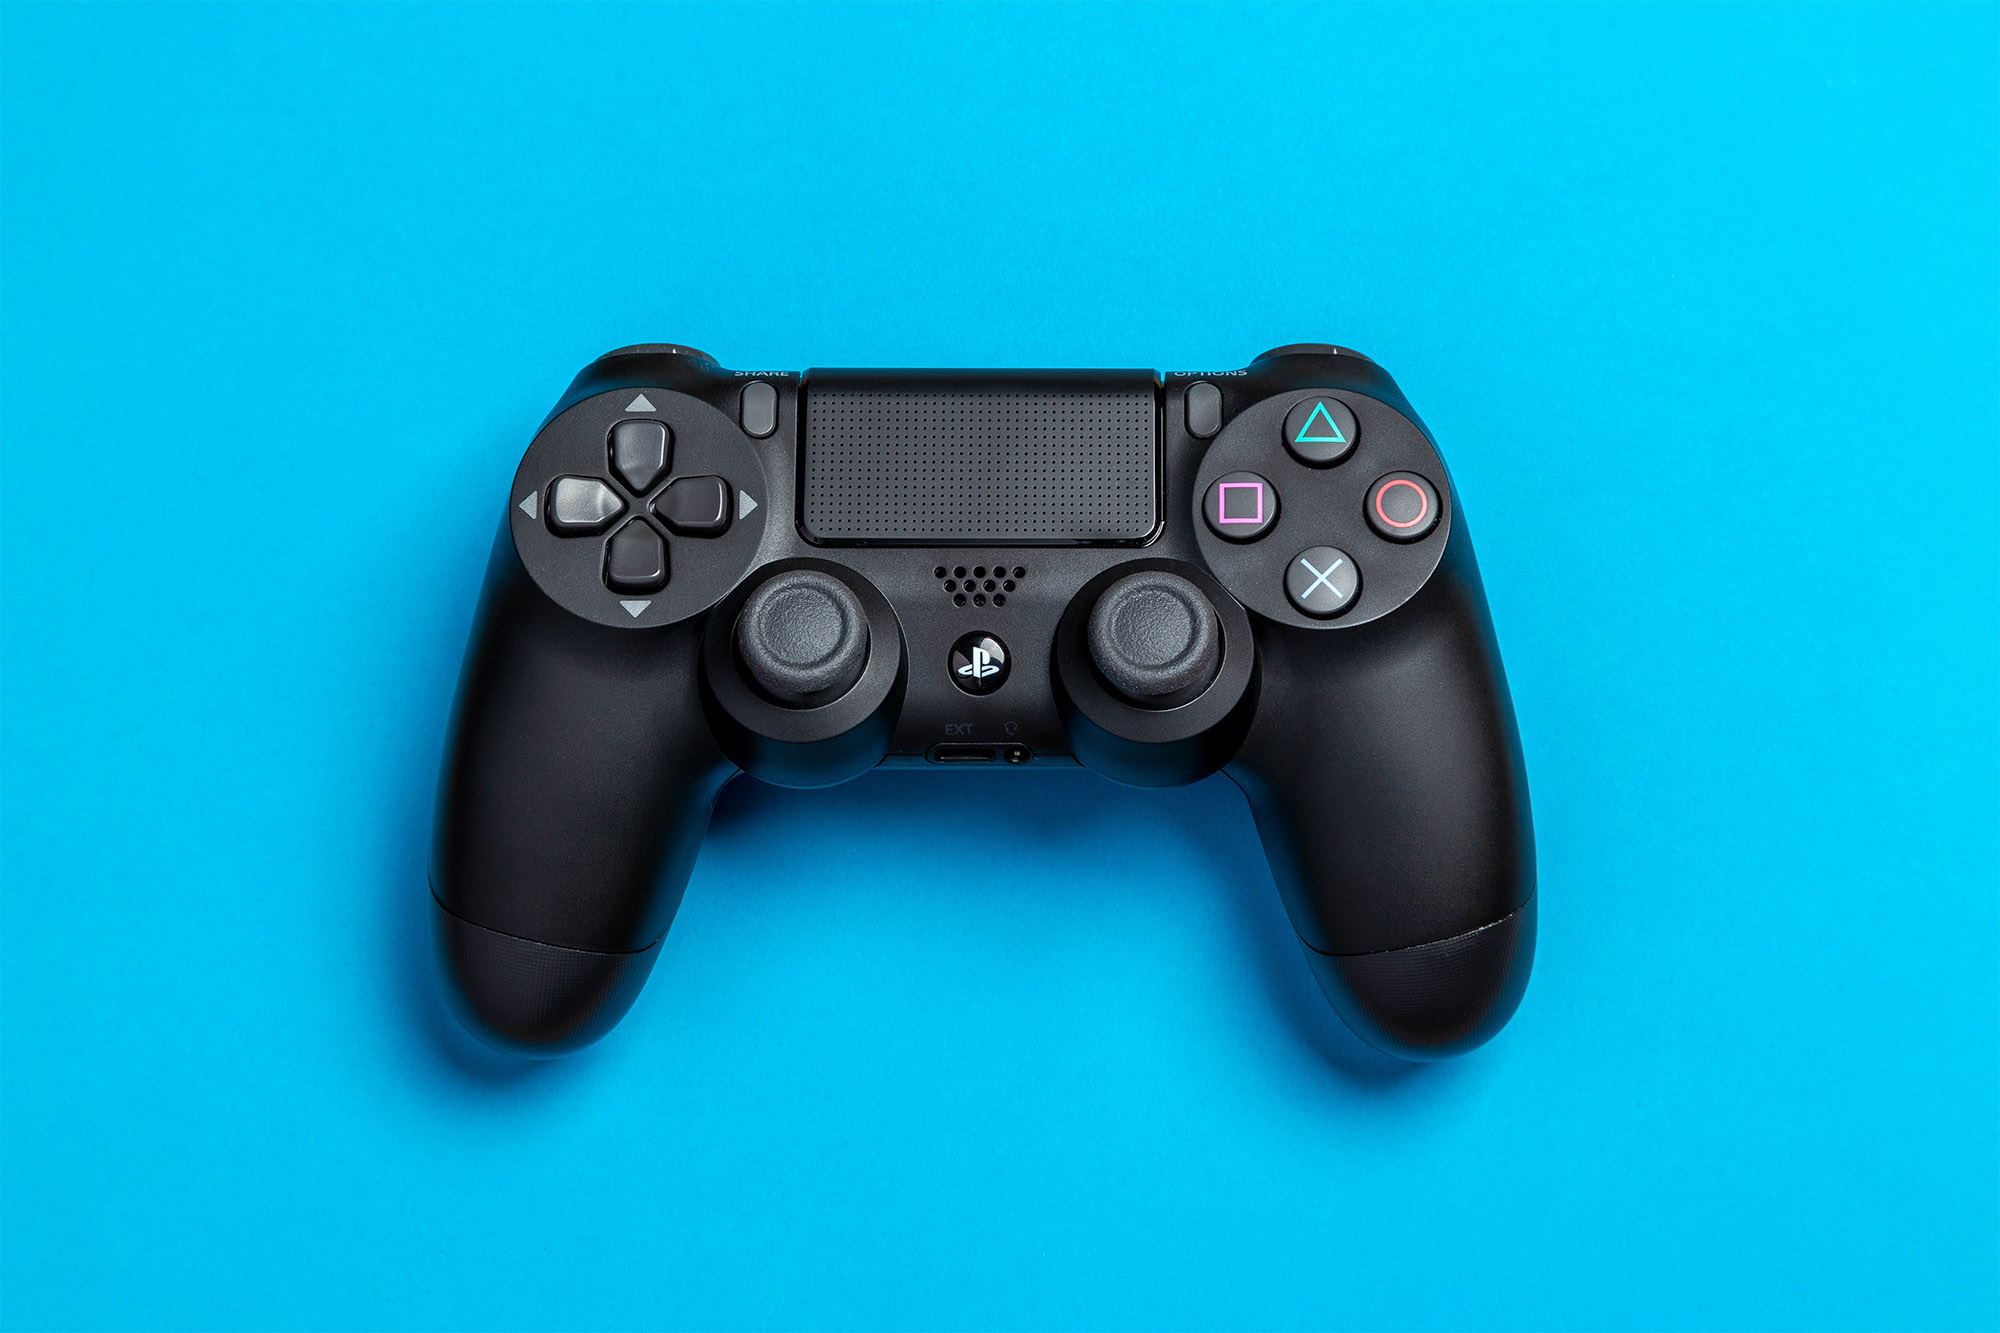 sne sang Fælles valg How to sync a PS4 controller | Digital Trends